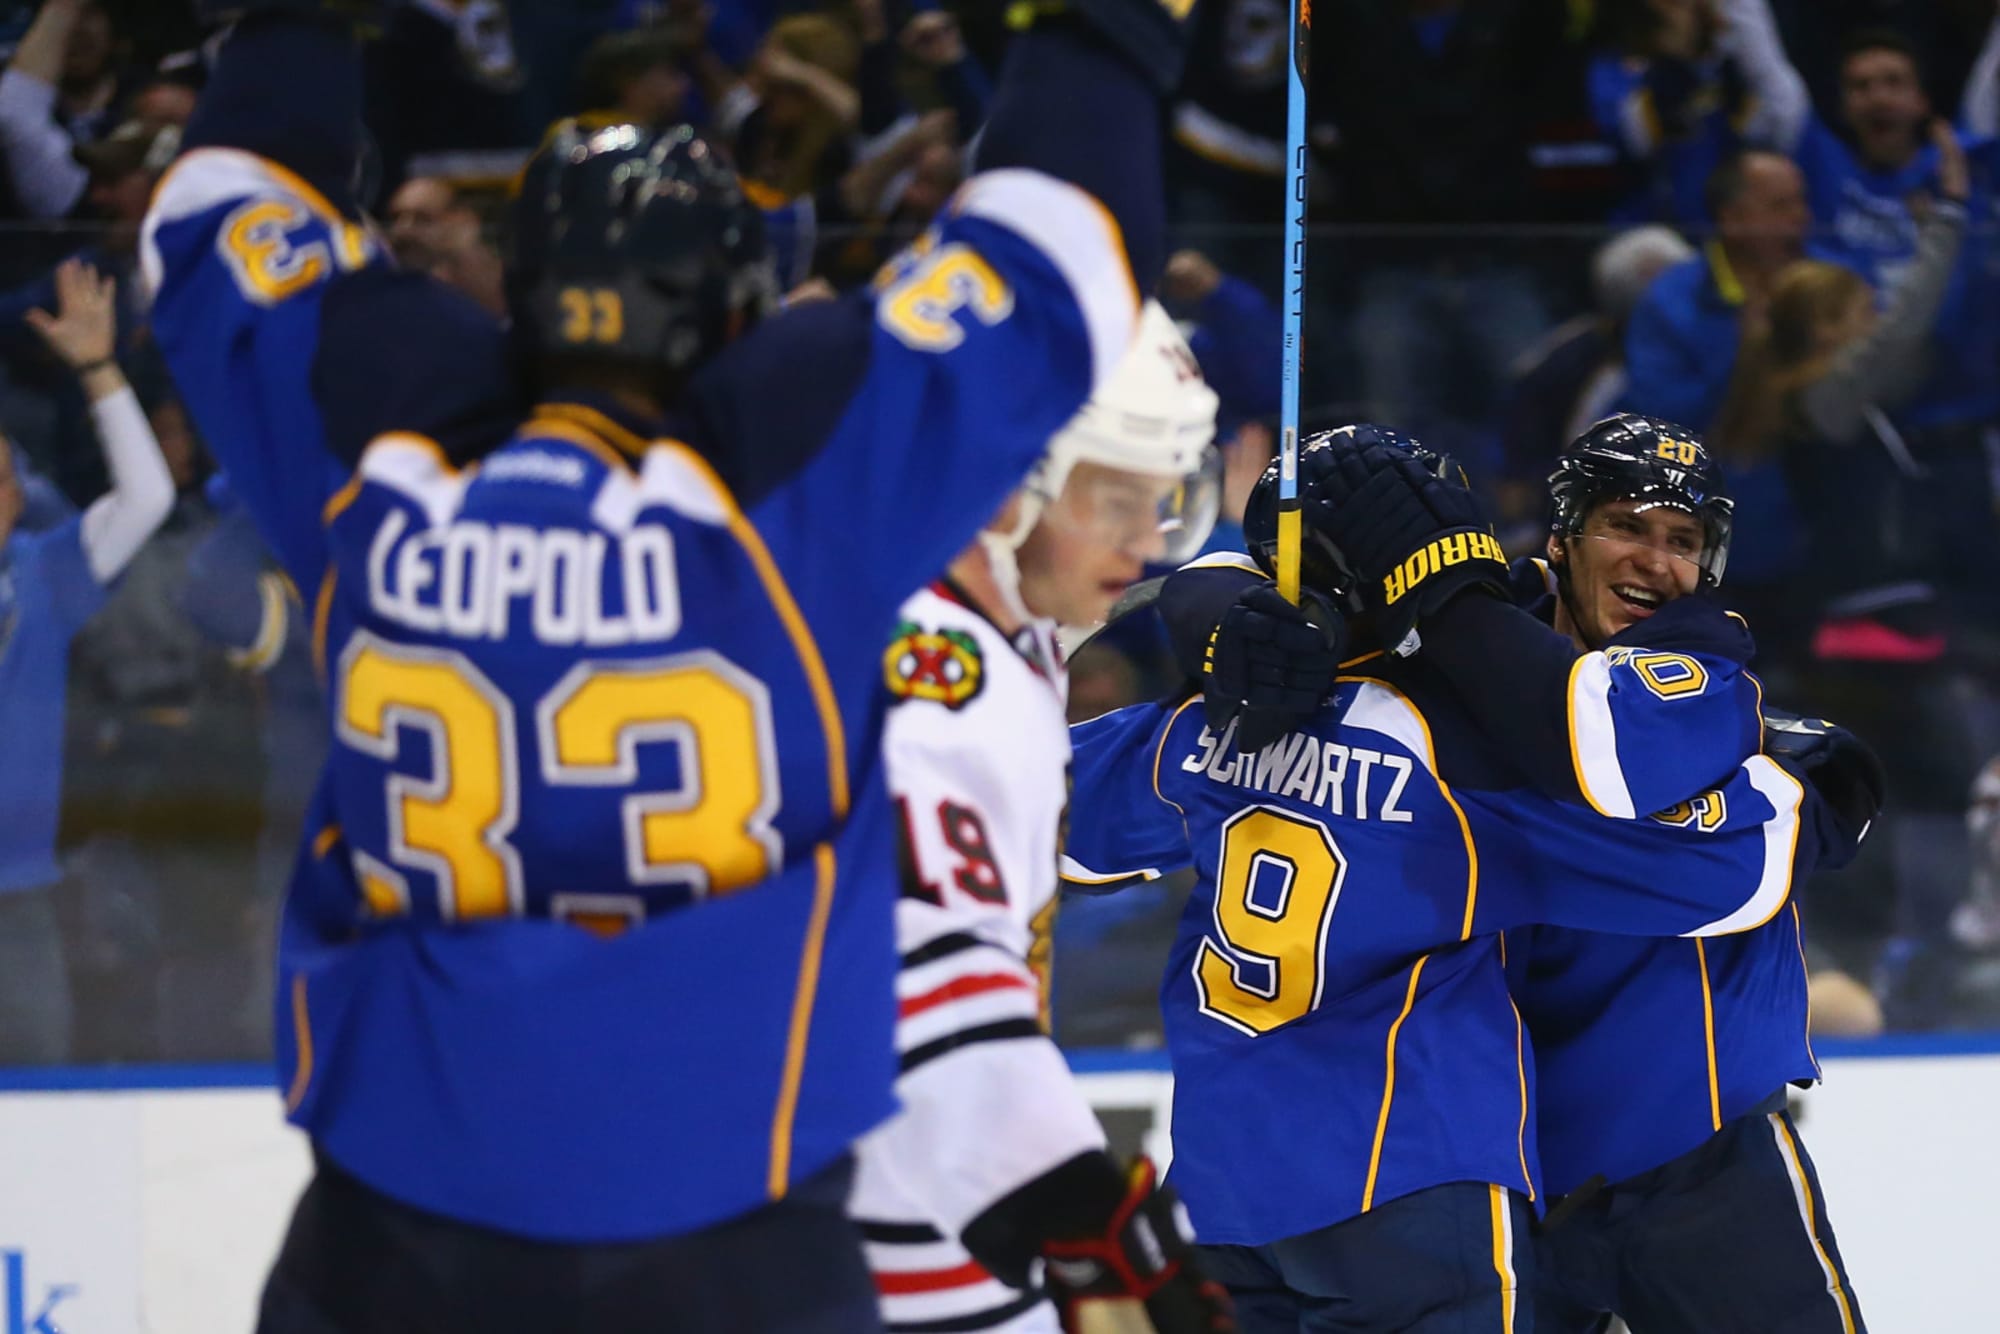 NHL Records - St. Louis Blues - All-Time Record vs. Opponents